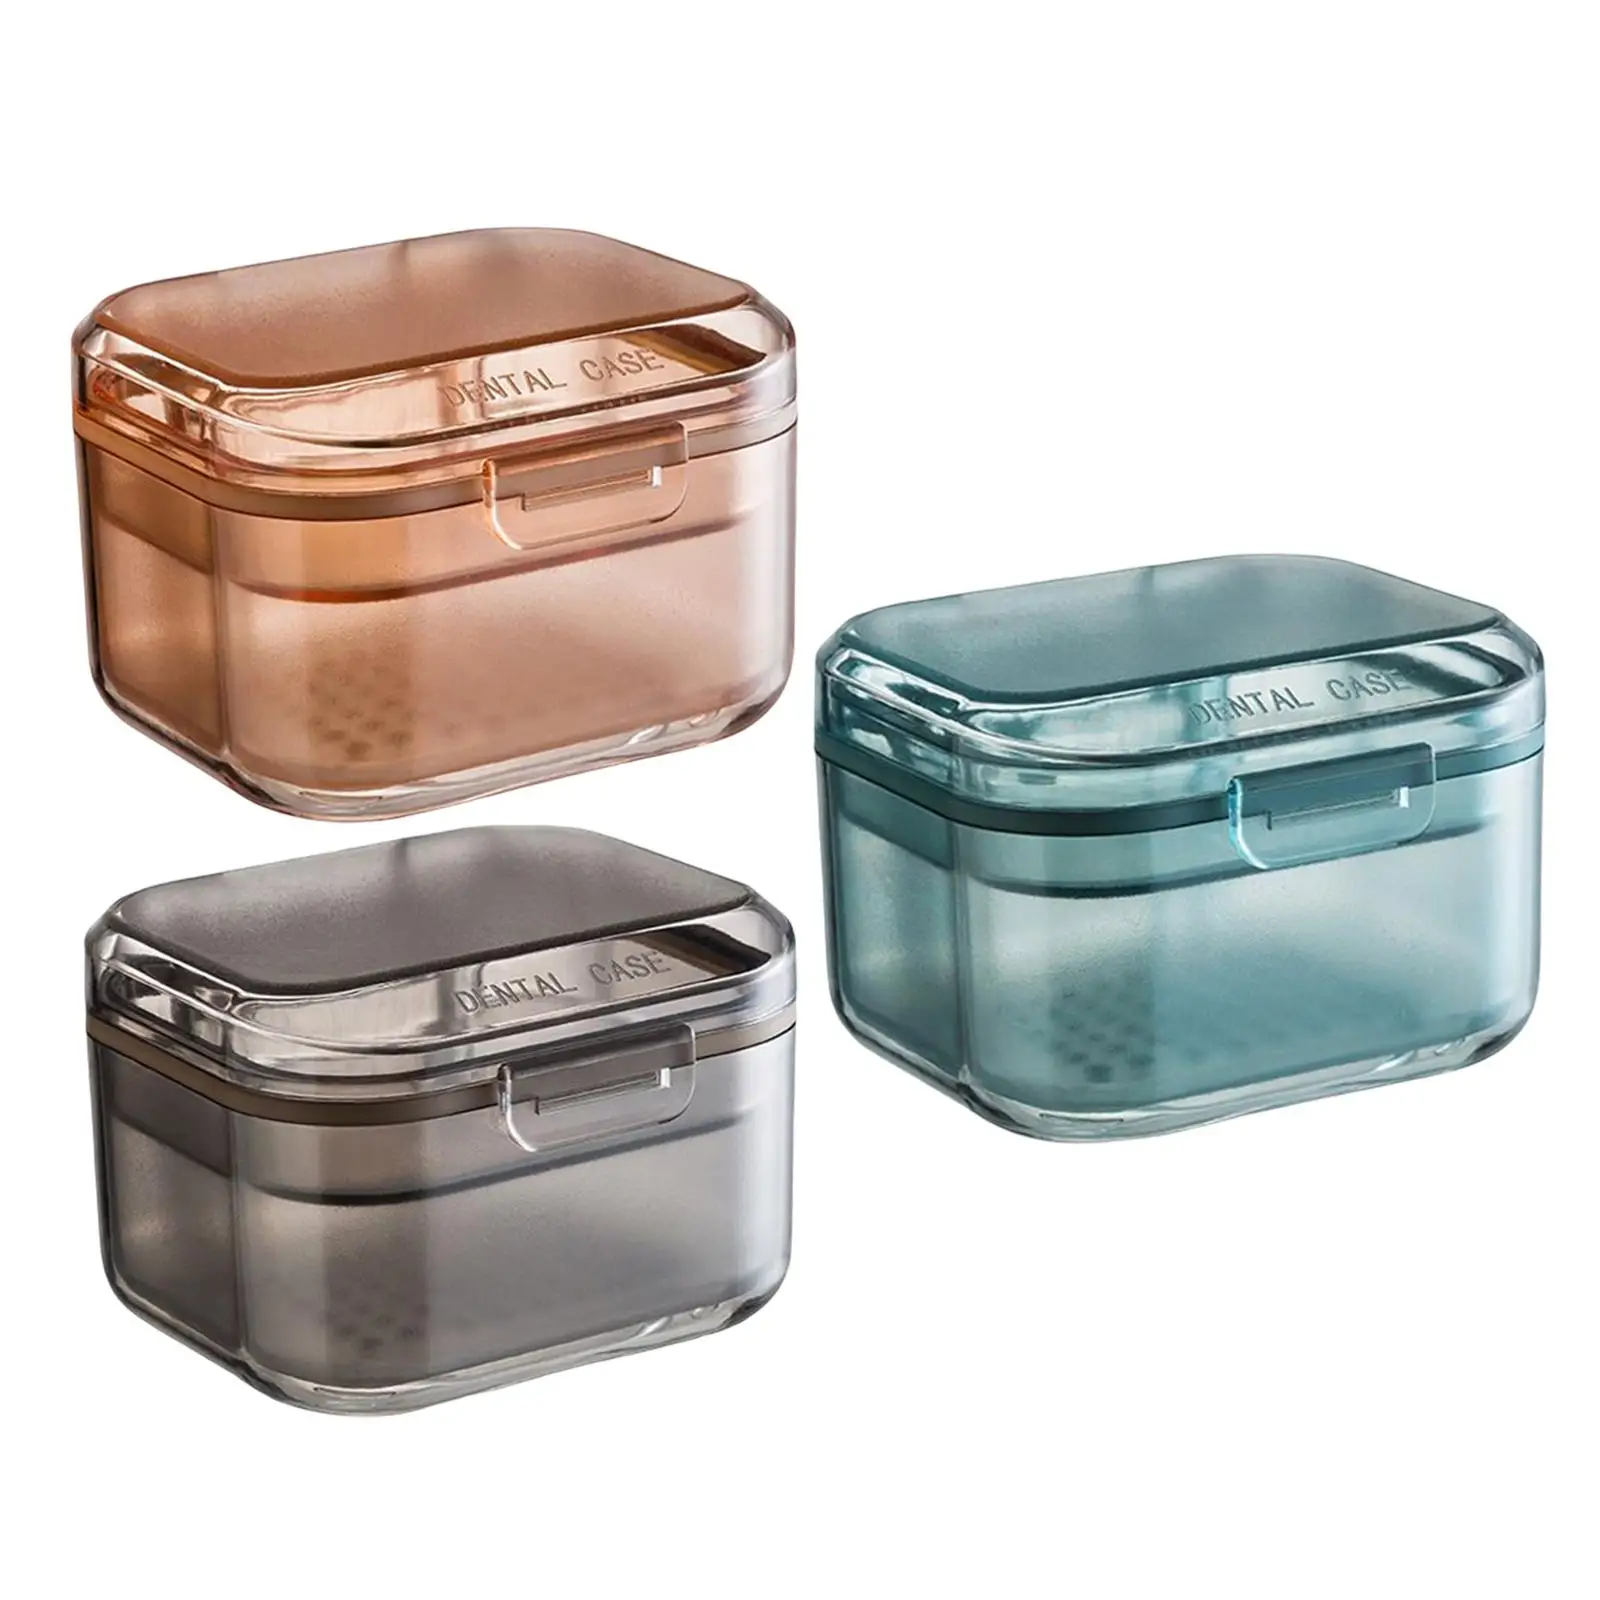 

Denture Case Retainer Case Container Organizing Cleaning Convenient Holder with Strainer Tooth Soaking Denture Cup Storage Box